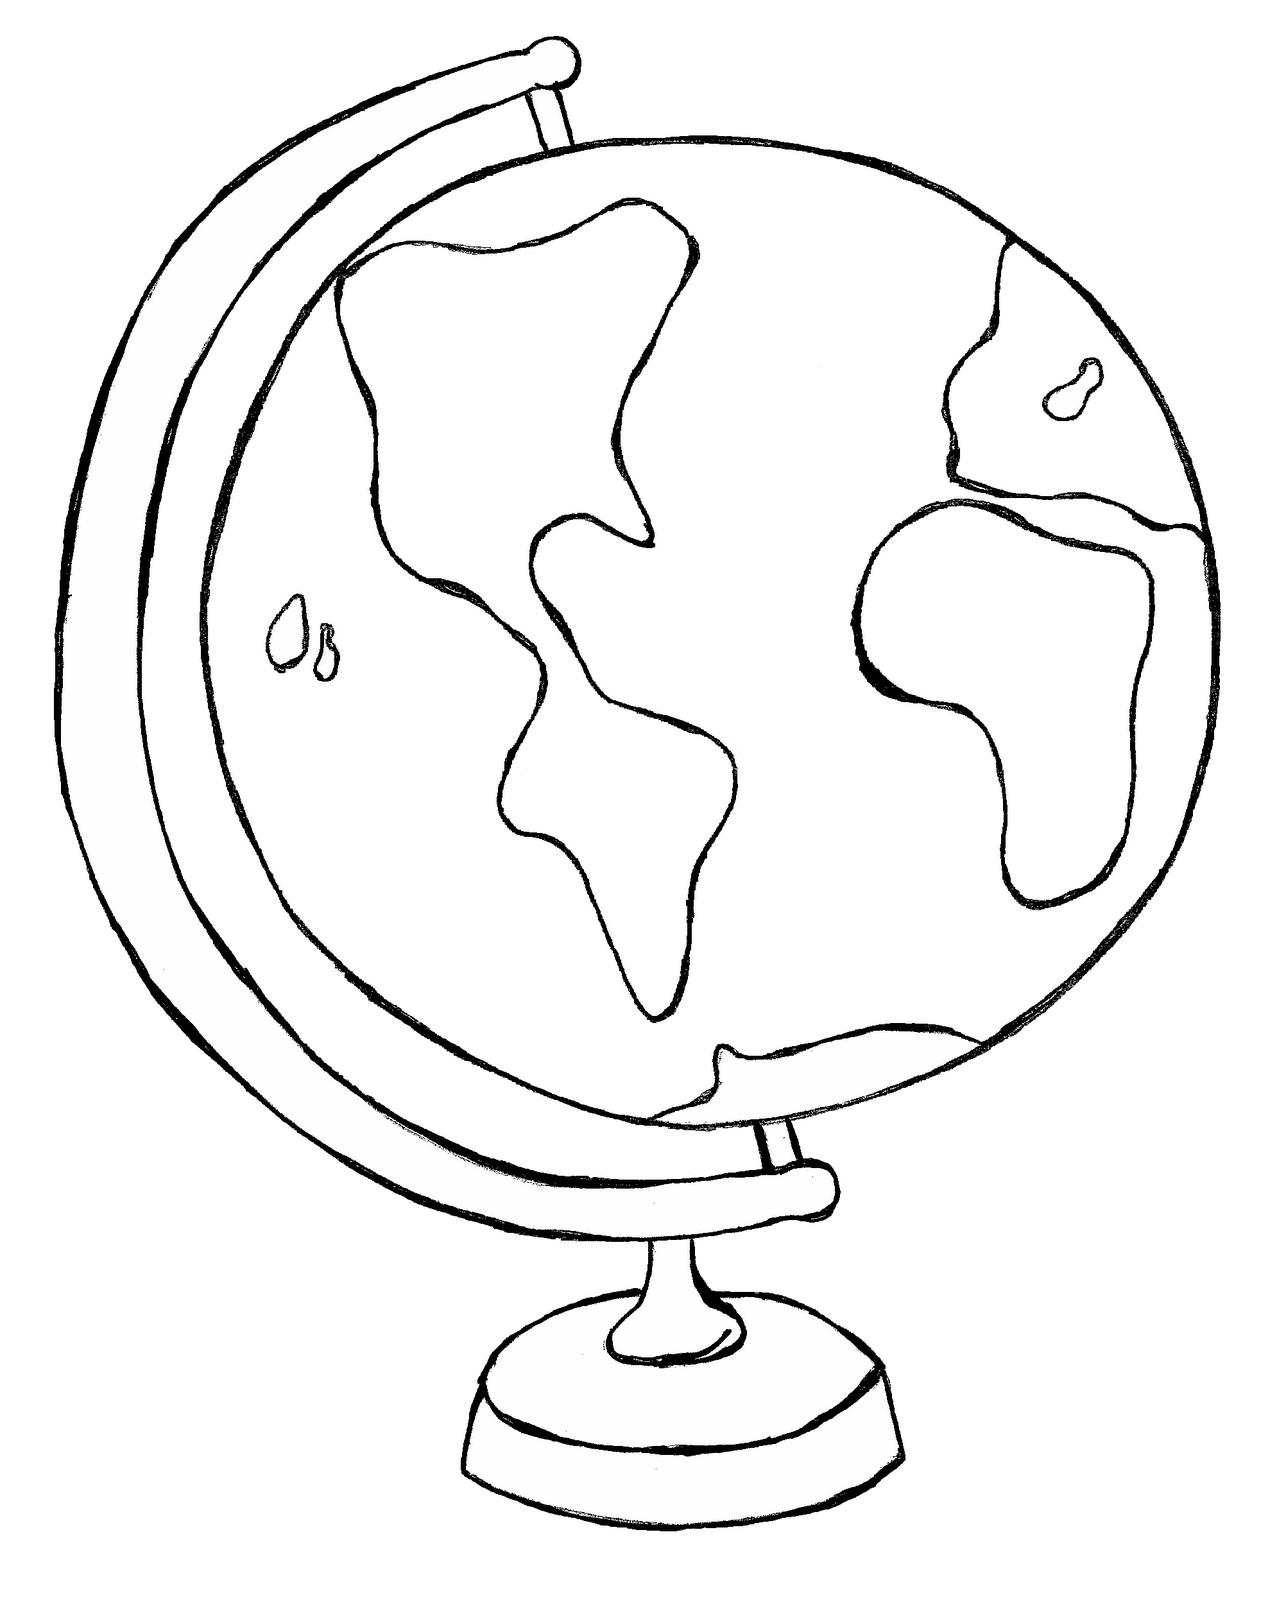 Maps clipart globes.